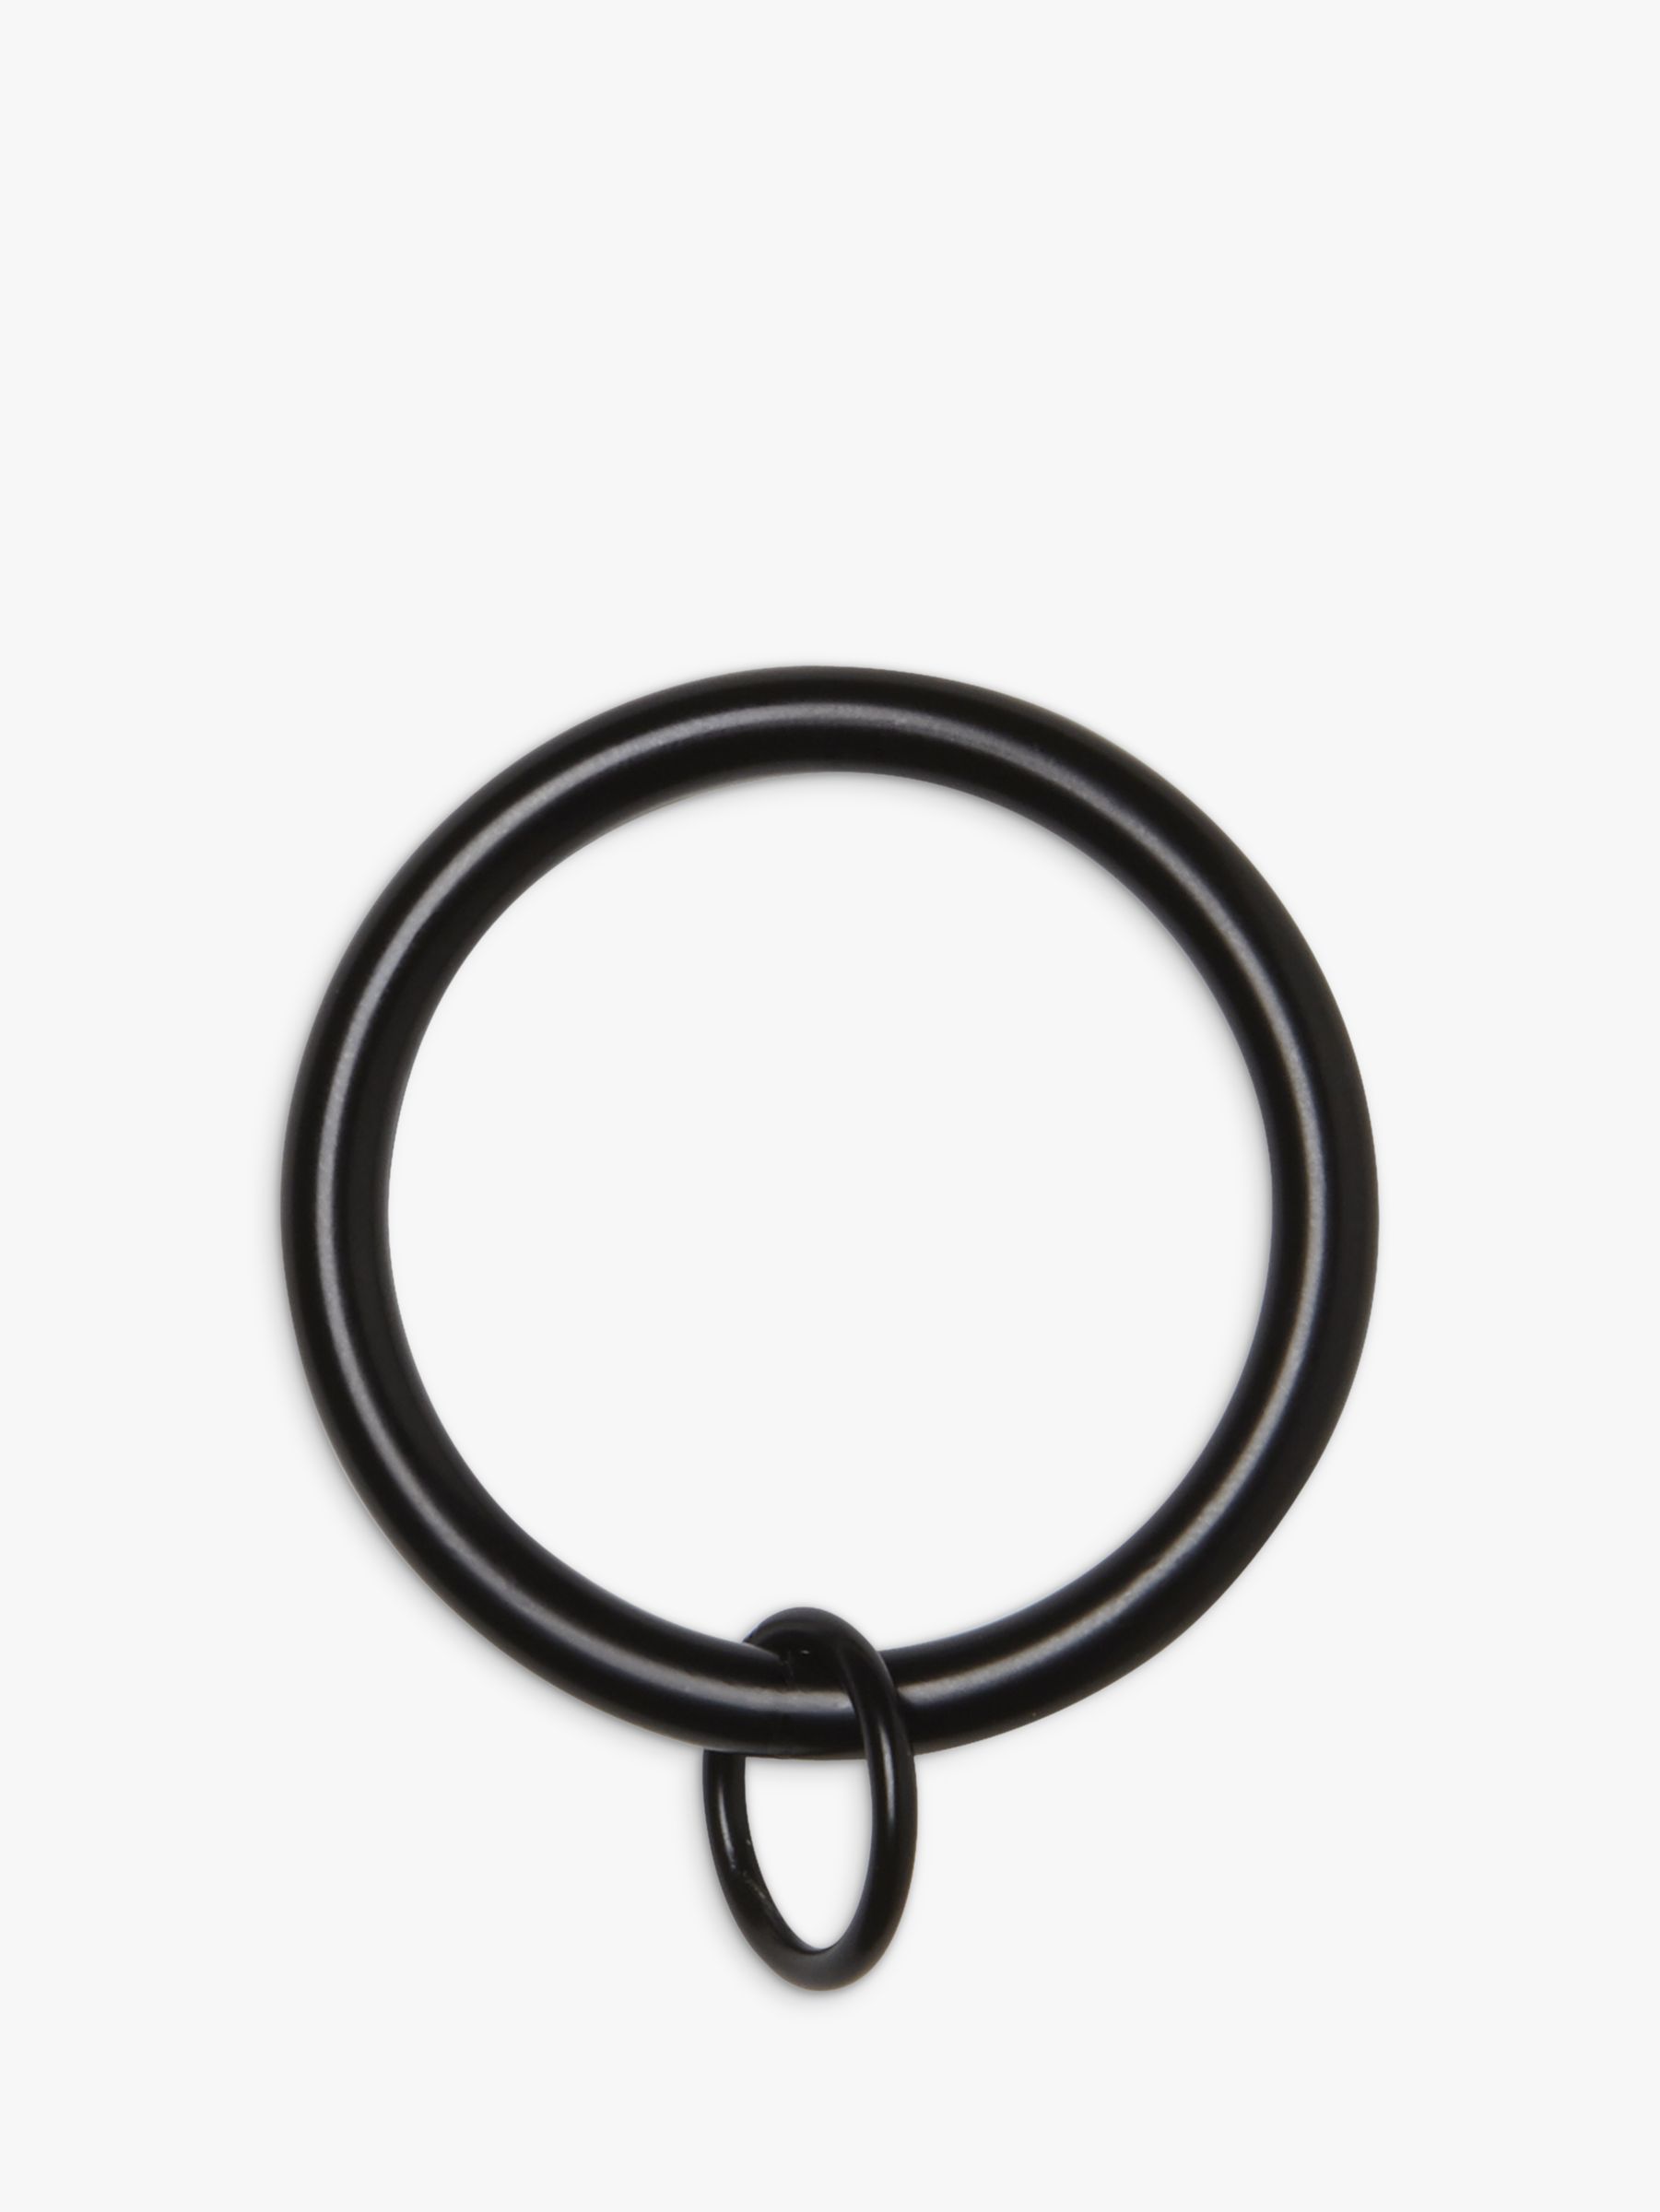 Umbra Black Double Pole Curtain Rings, Pack of 7, Dia.25mm